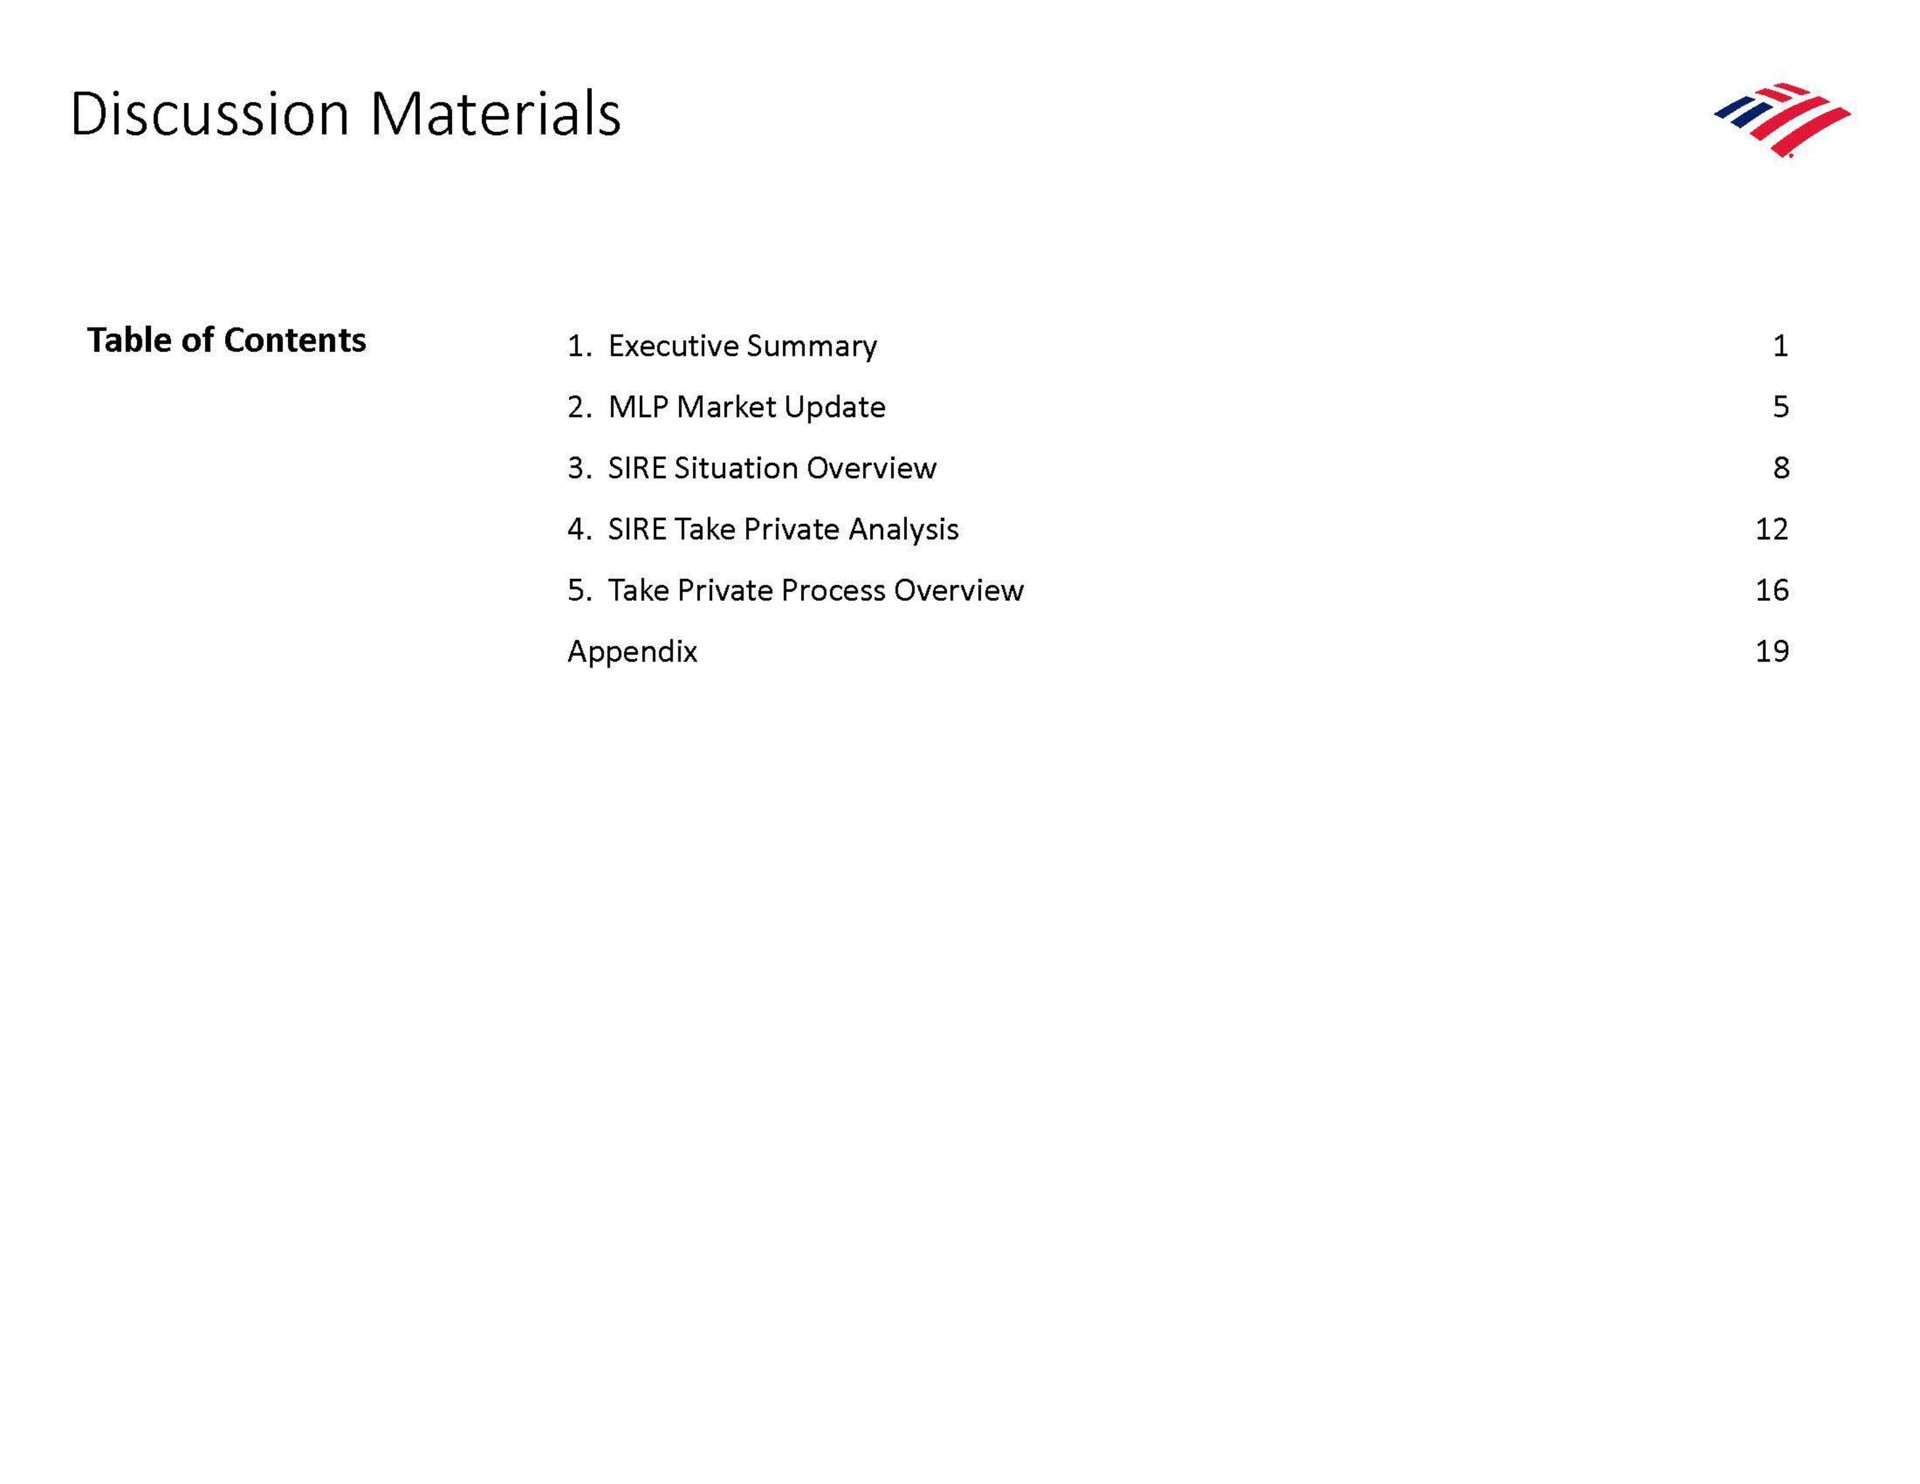 discussion materials table of contents | Bank of America